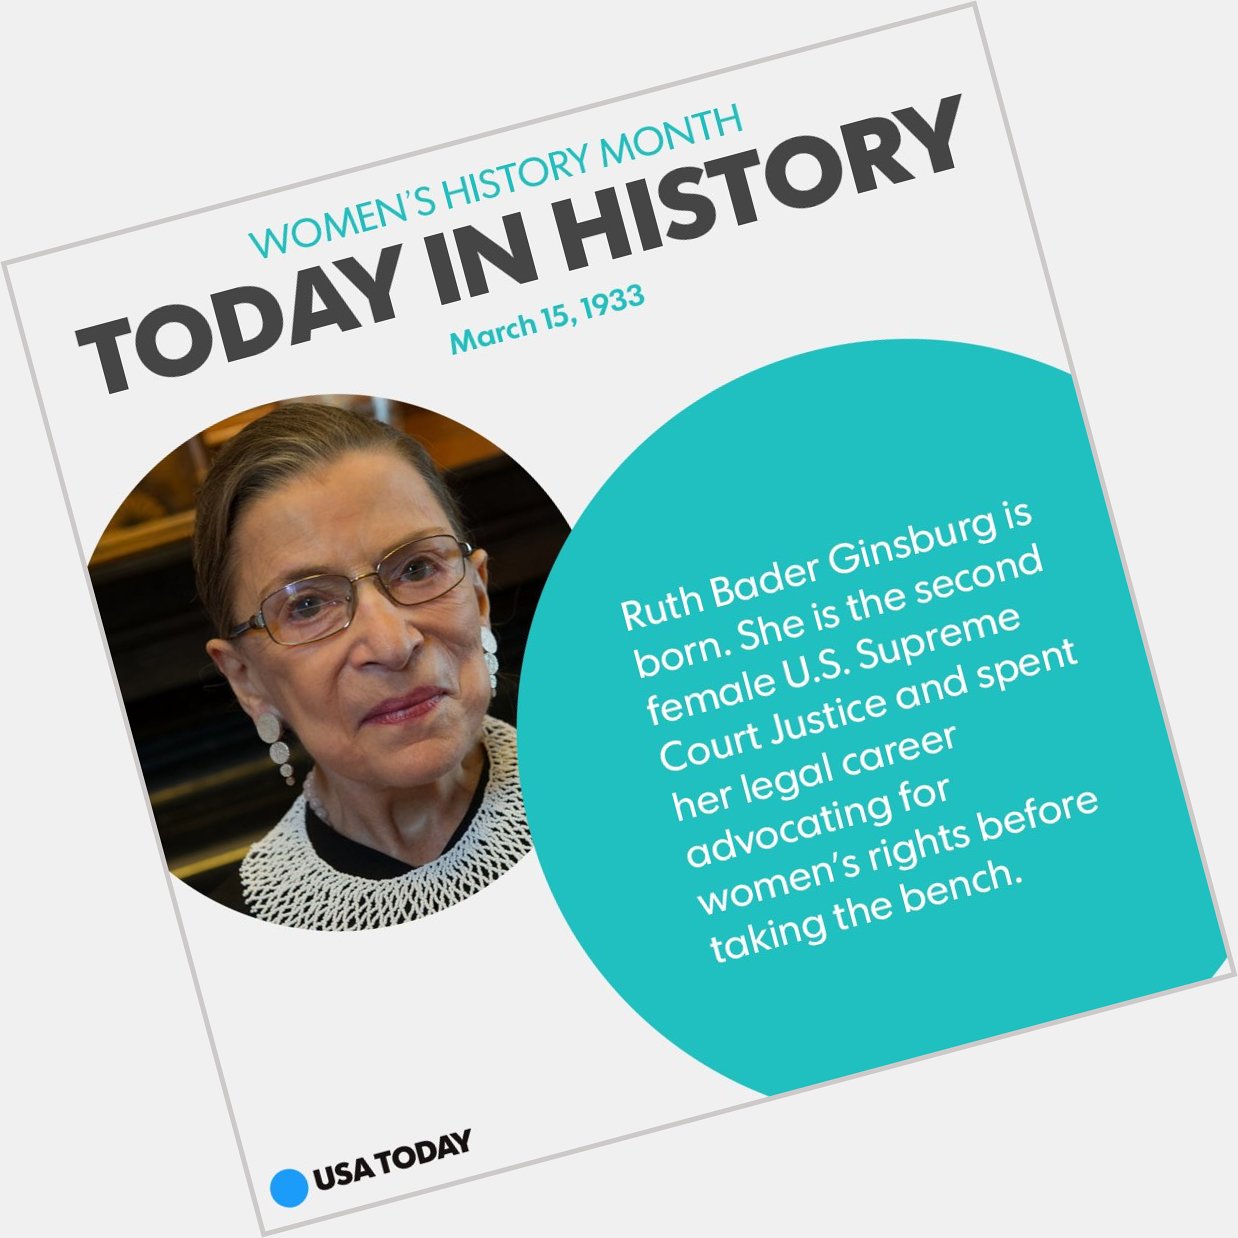    Happy birthday to Ruth Bader Ginsburg, a lifelong advocate of women\s rights! 